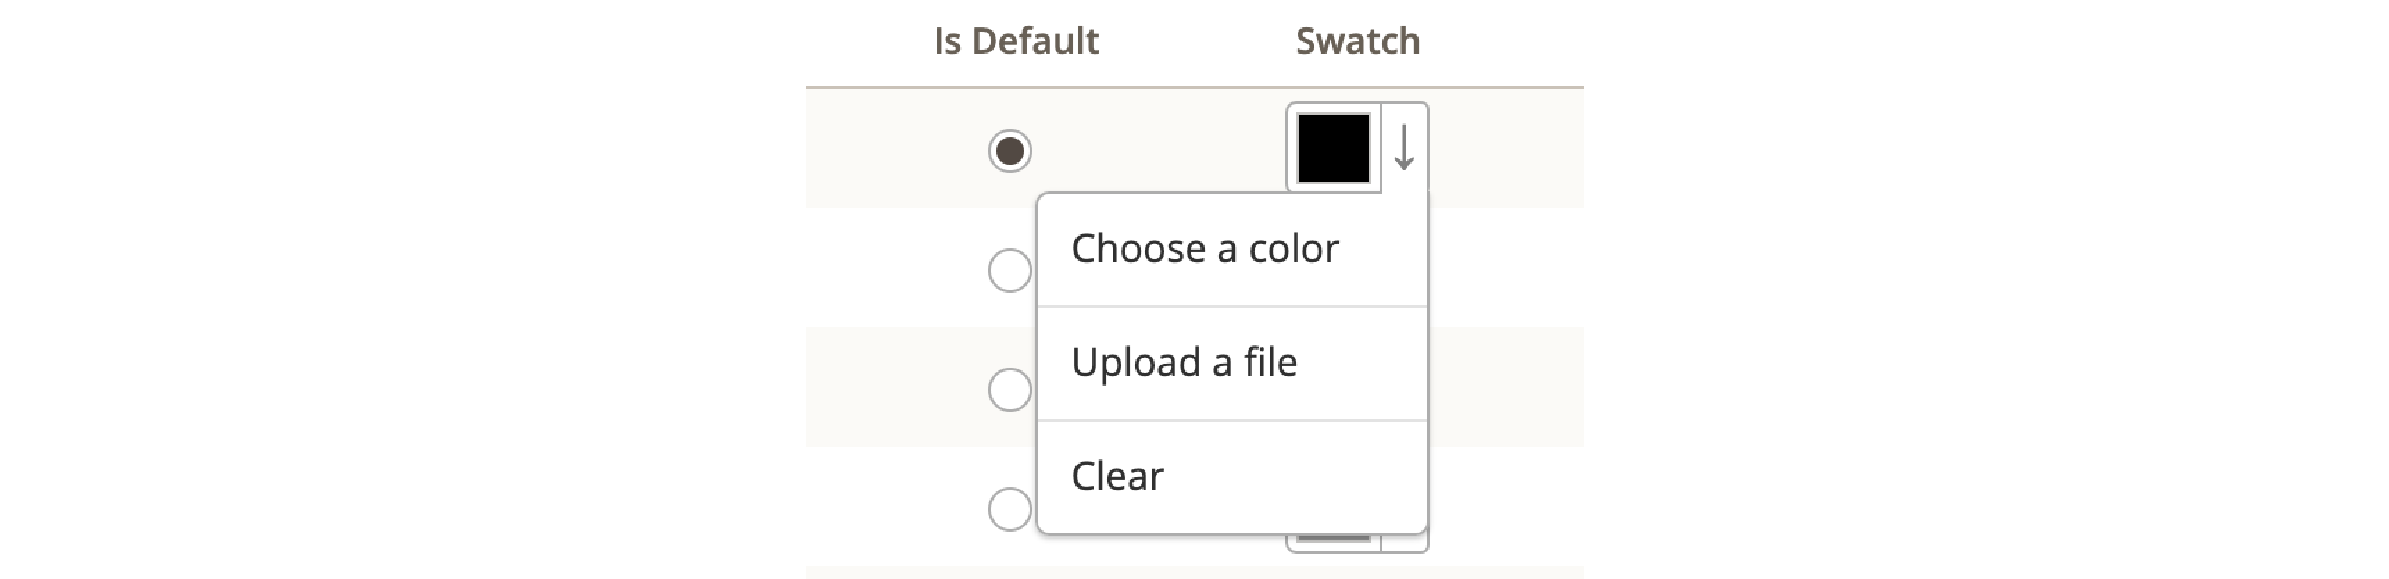 Selecting color options for Magento 2 swatches